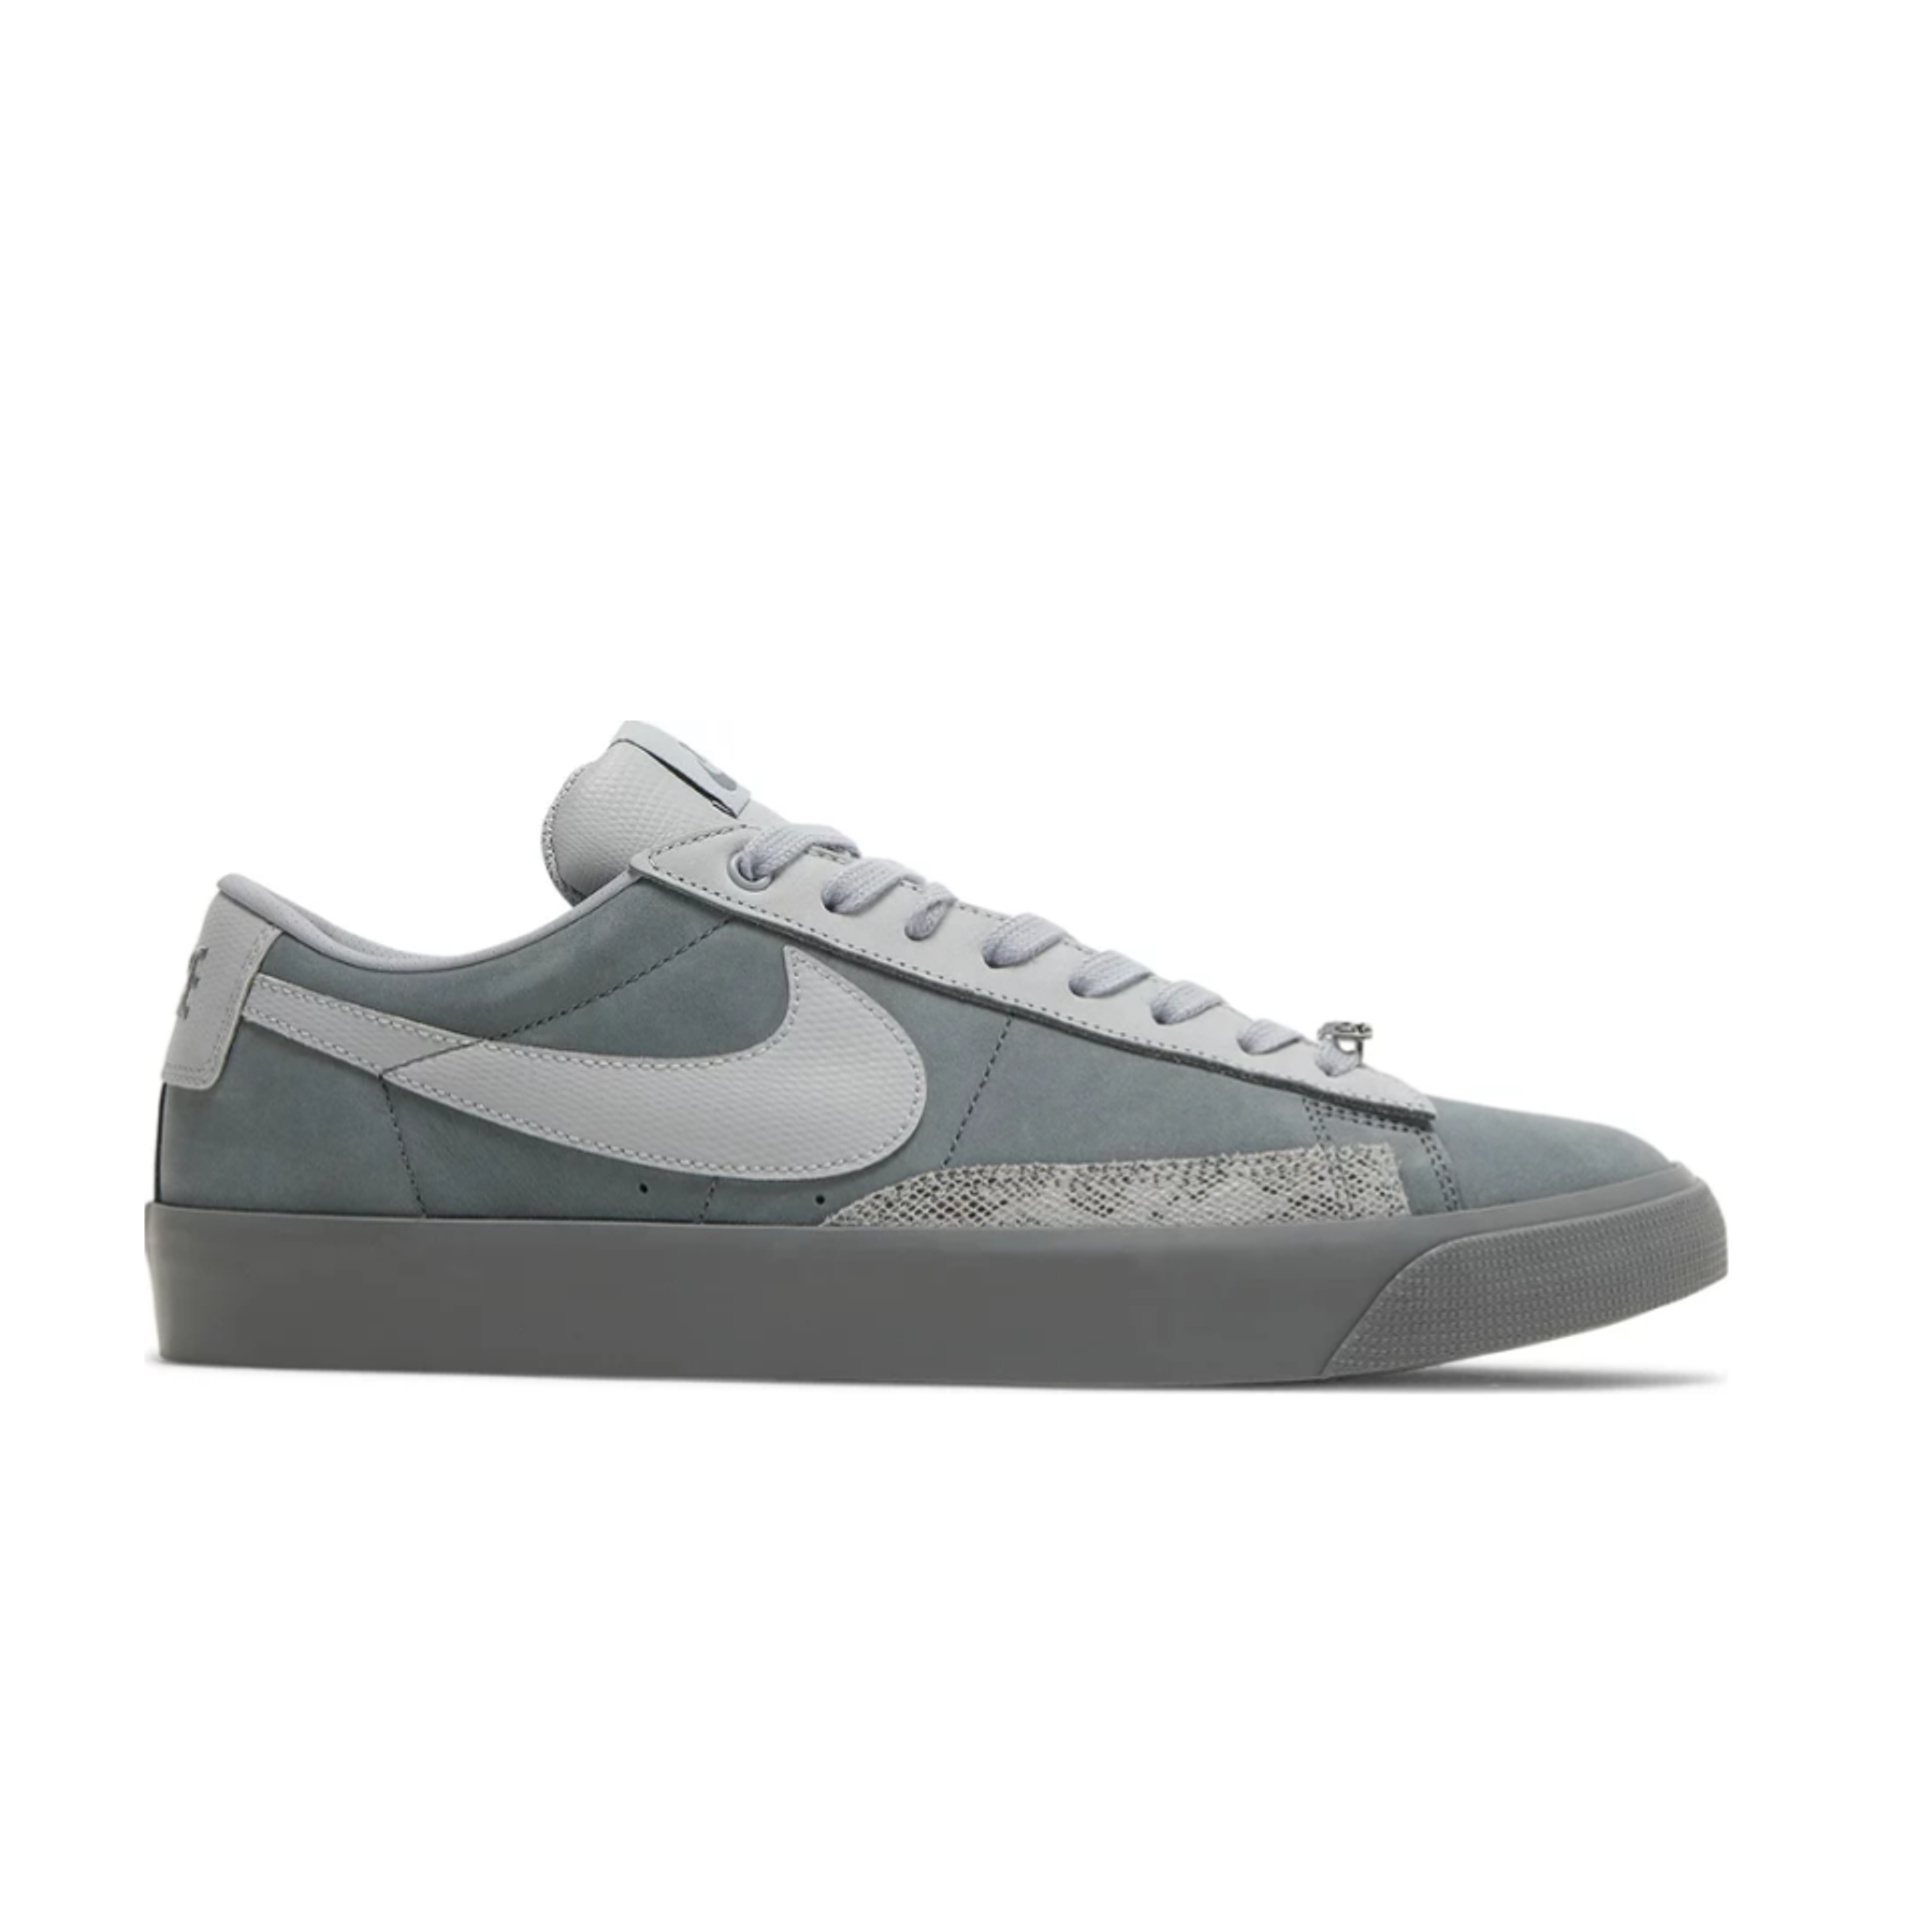 Nike Forty Percent Against Rights x Blazer Low SB 'Cool Grey'